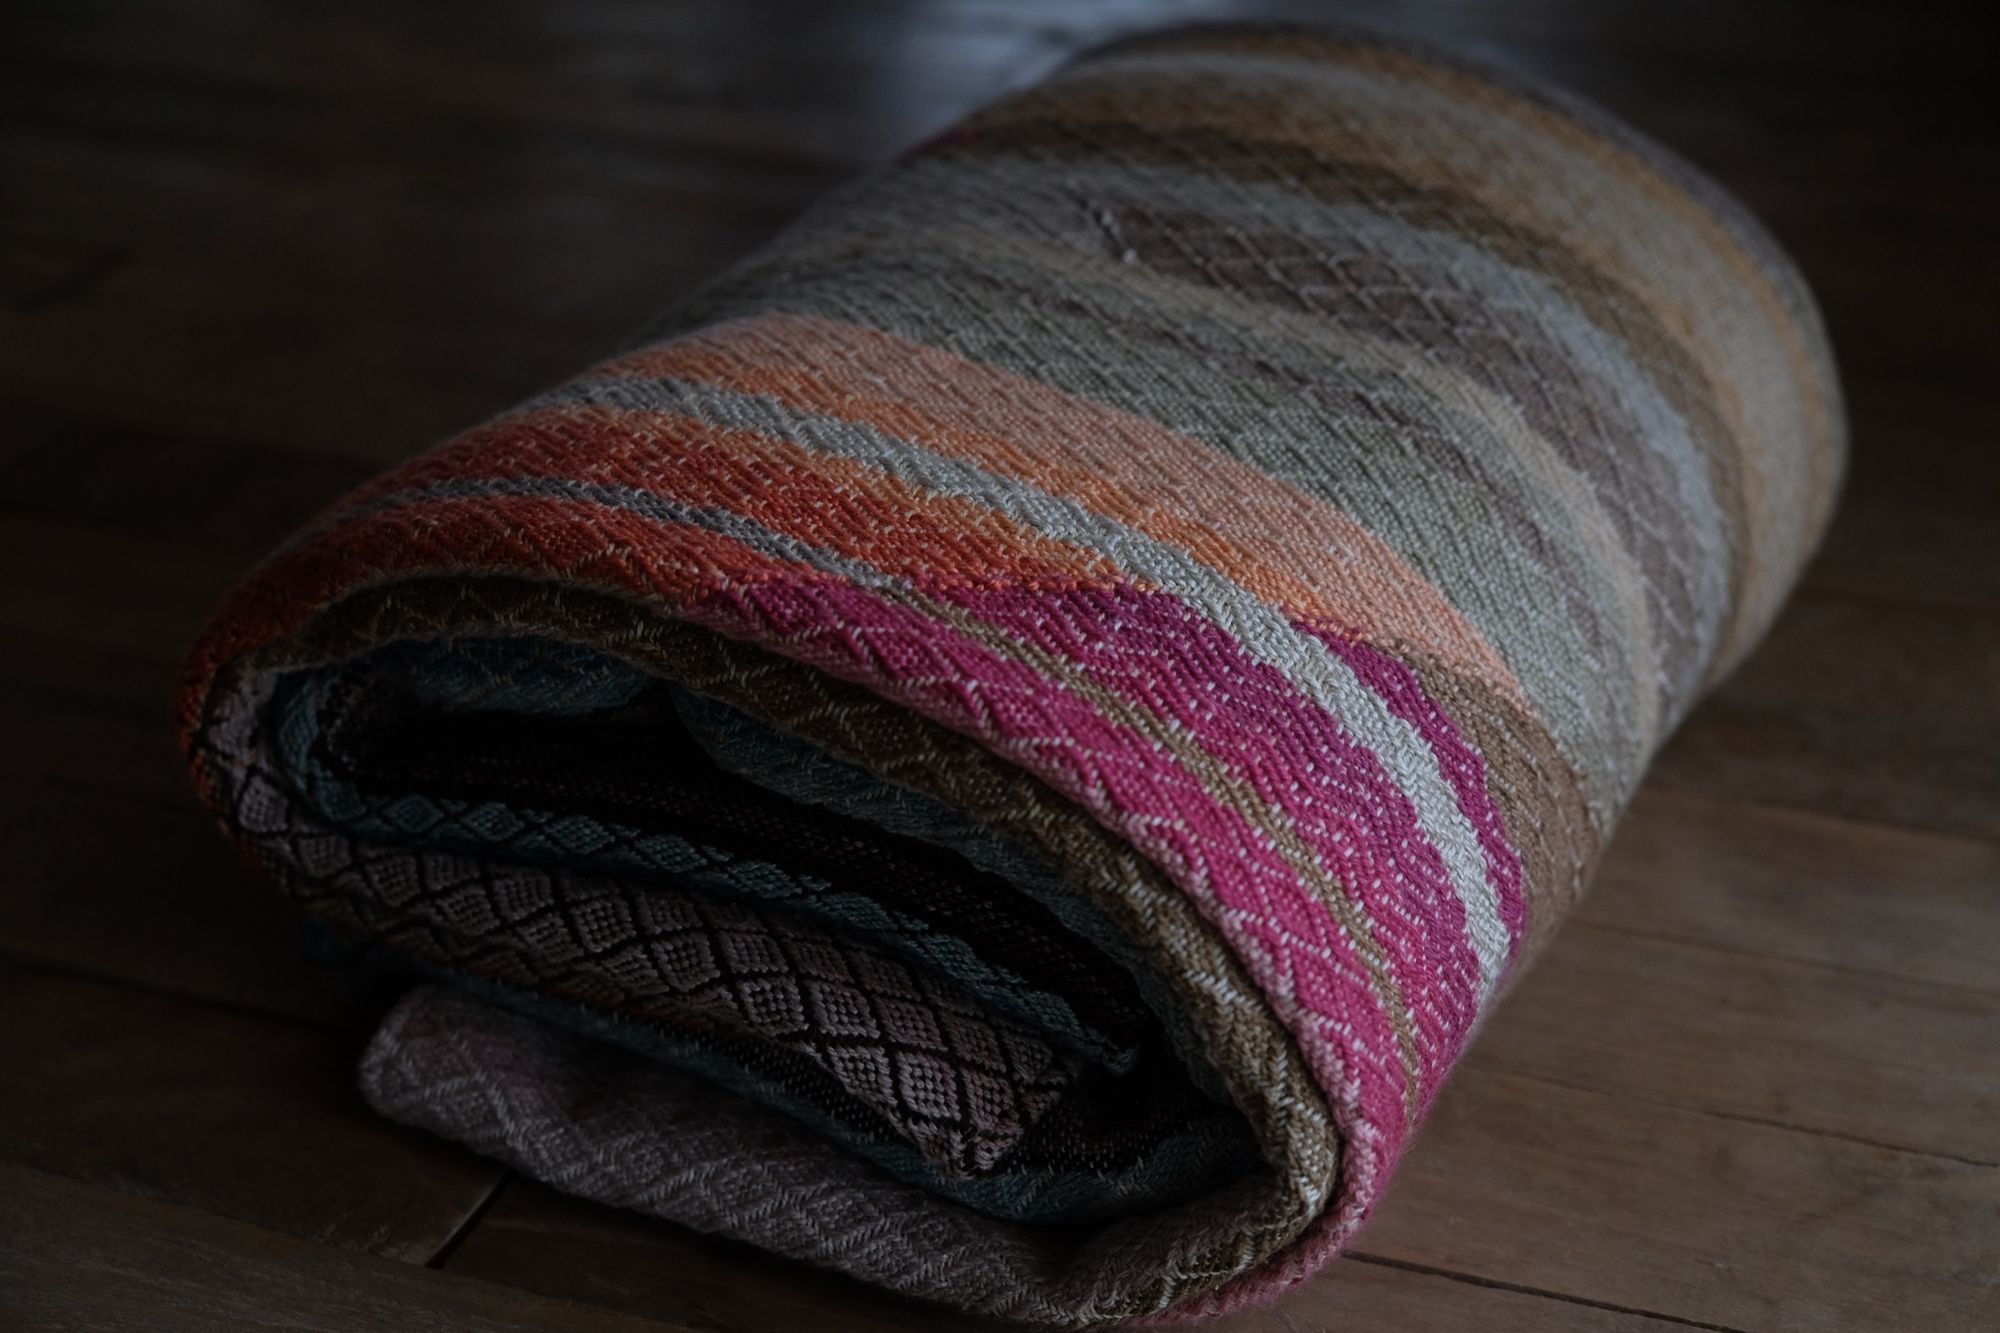 geometric shaped, natural and rainbow colored handwoven, diamond pattern fabric on a wooden floor, folded